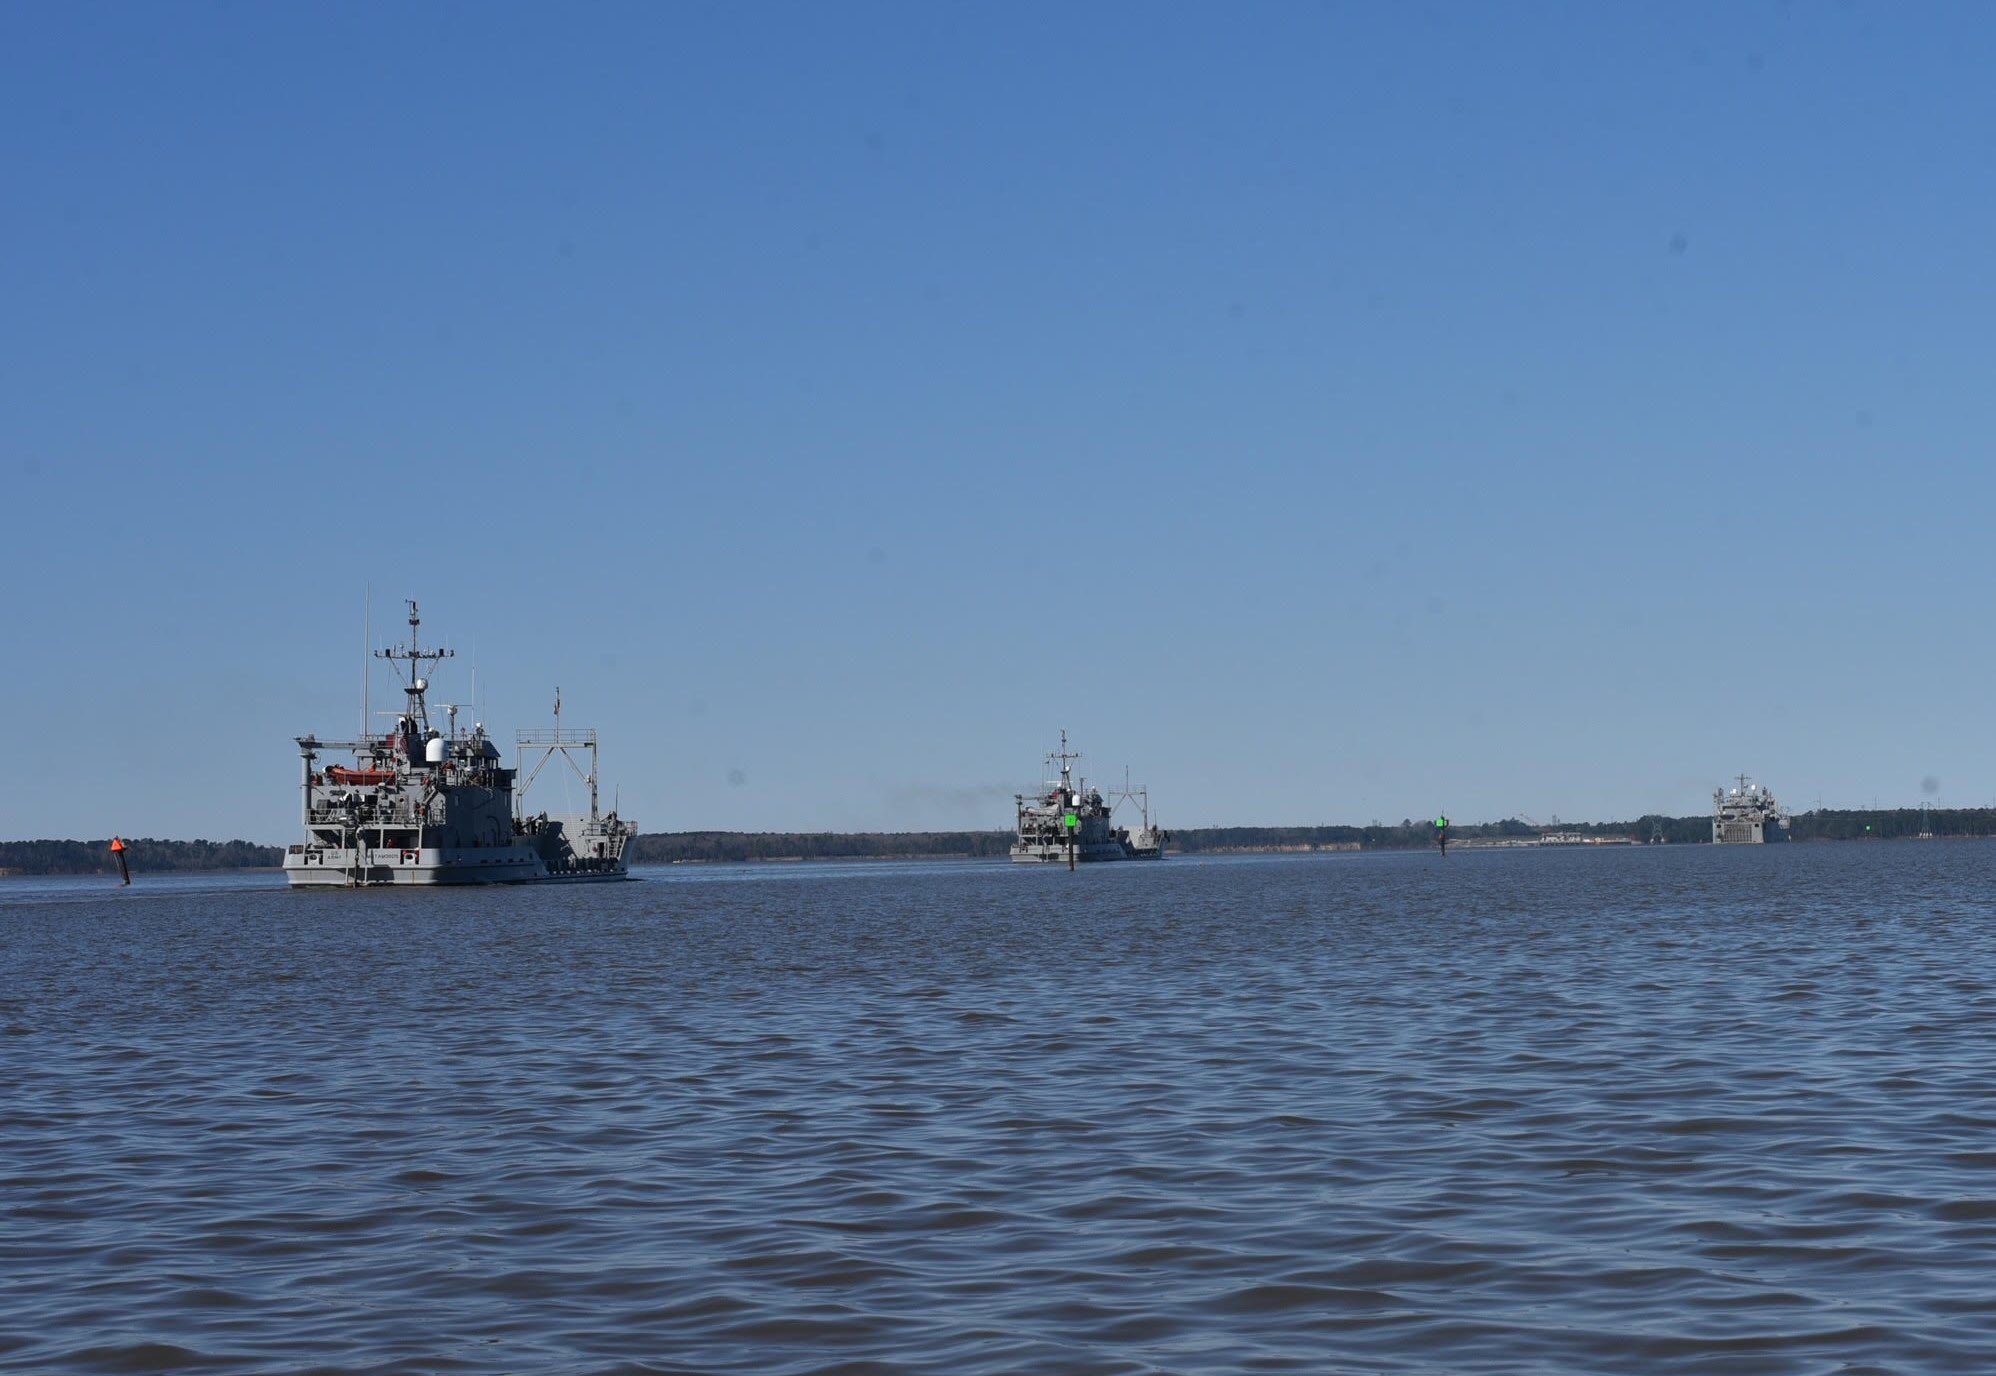 U.S. Army Vessels (USAV SP4 James A. Loux (LSV-6), USAV Monterrey (LCU30), USAV Matamoros (LCU26), and USAV Wilson Warf (LCU11) from the 7th Transportation Brigade (Expeditionary), 3rd Expeditionary Sustainment Command, XVIII Airborne Corps, departed Joint Base Langley-Eustis, March 12, 2024. Photo courtesy U.S. Central Command